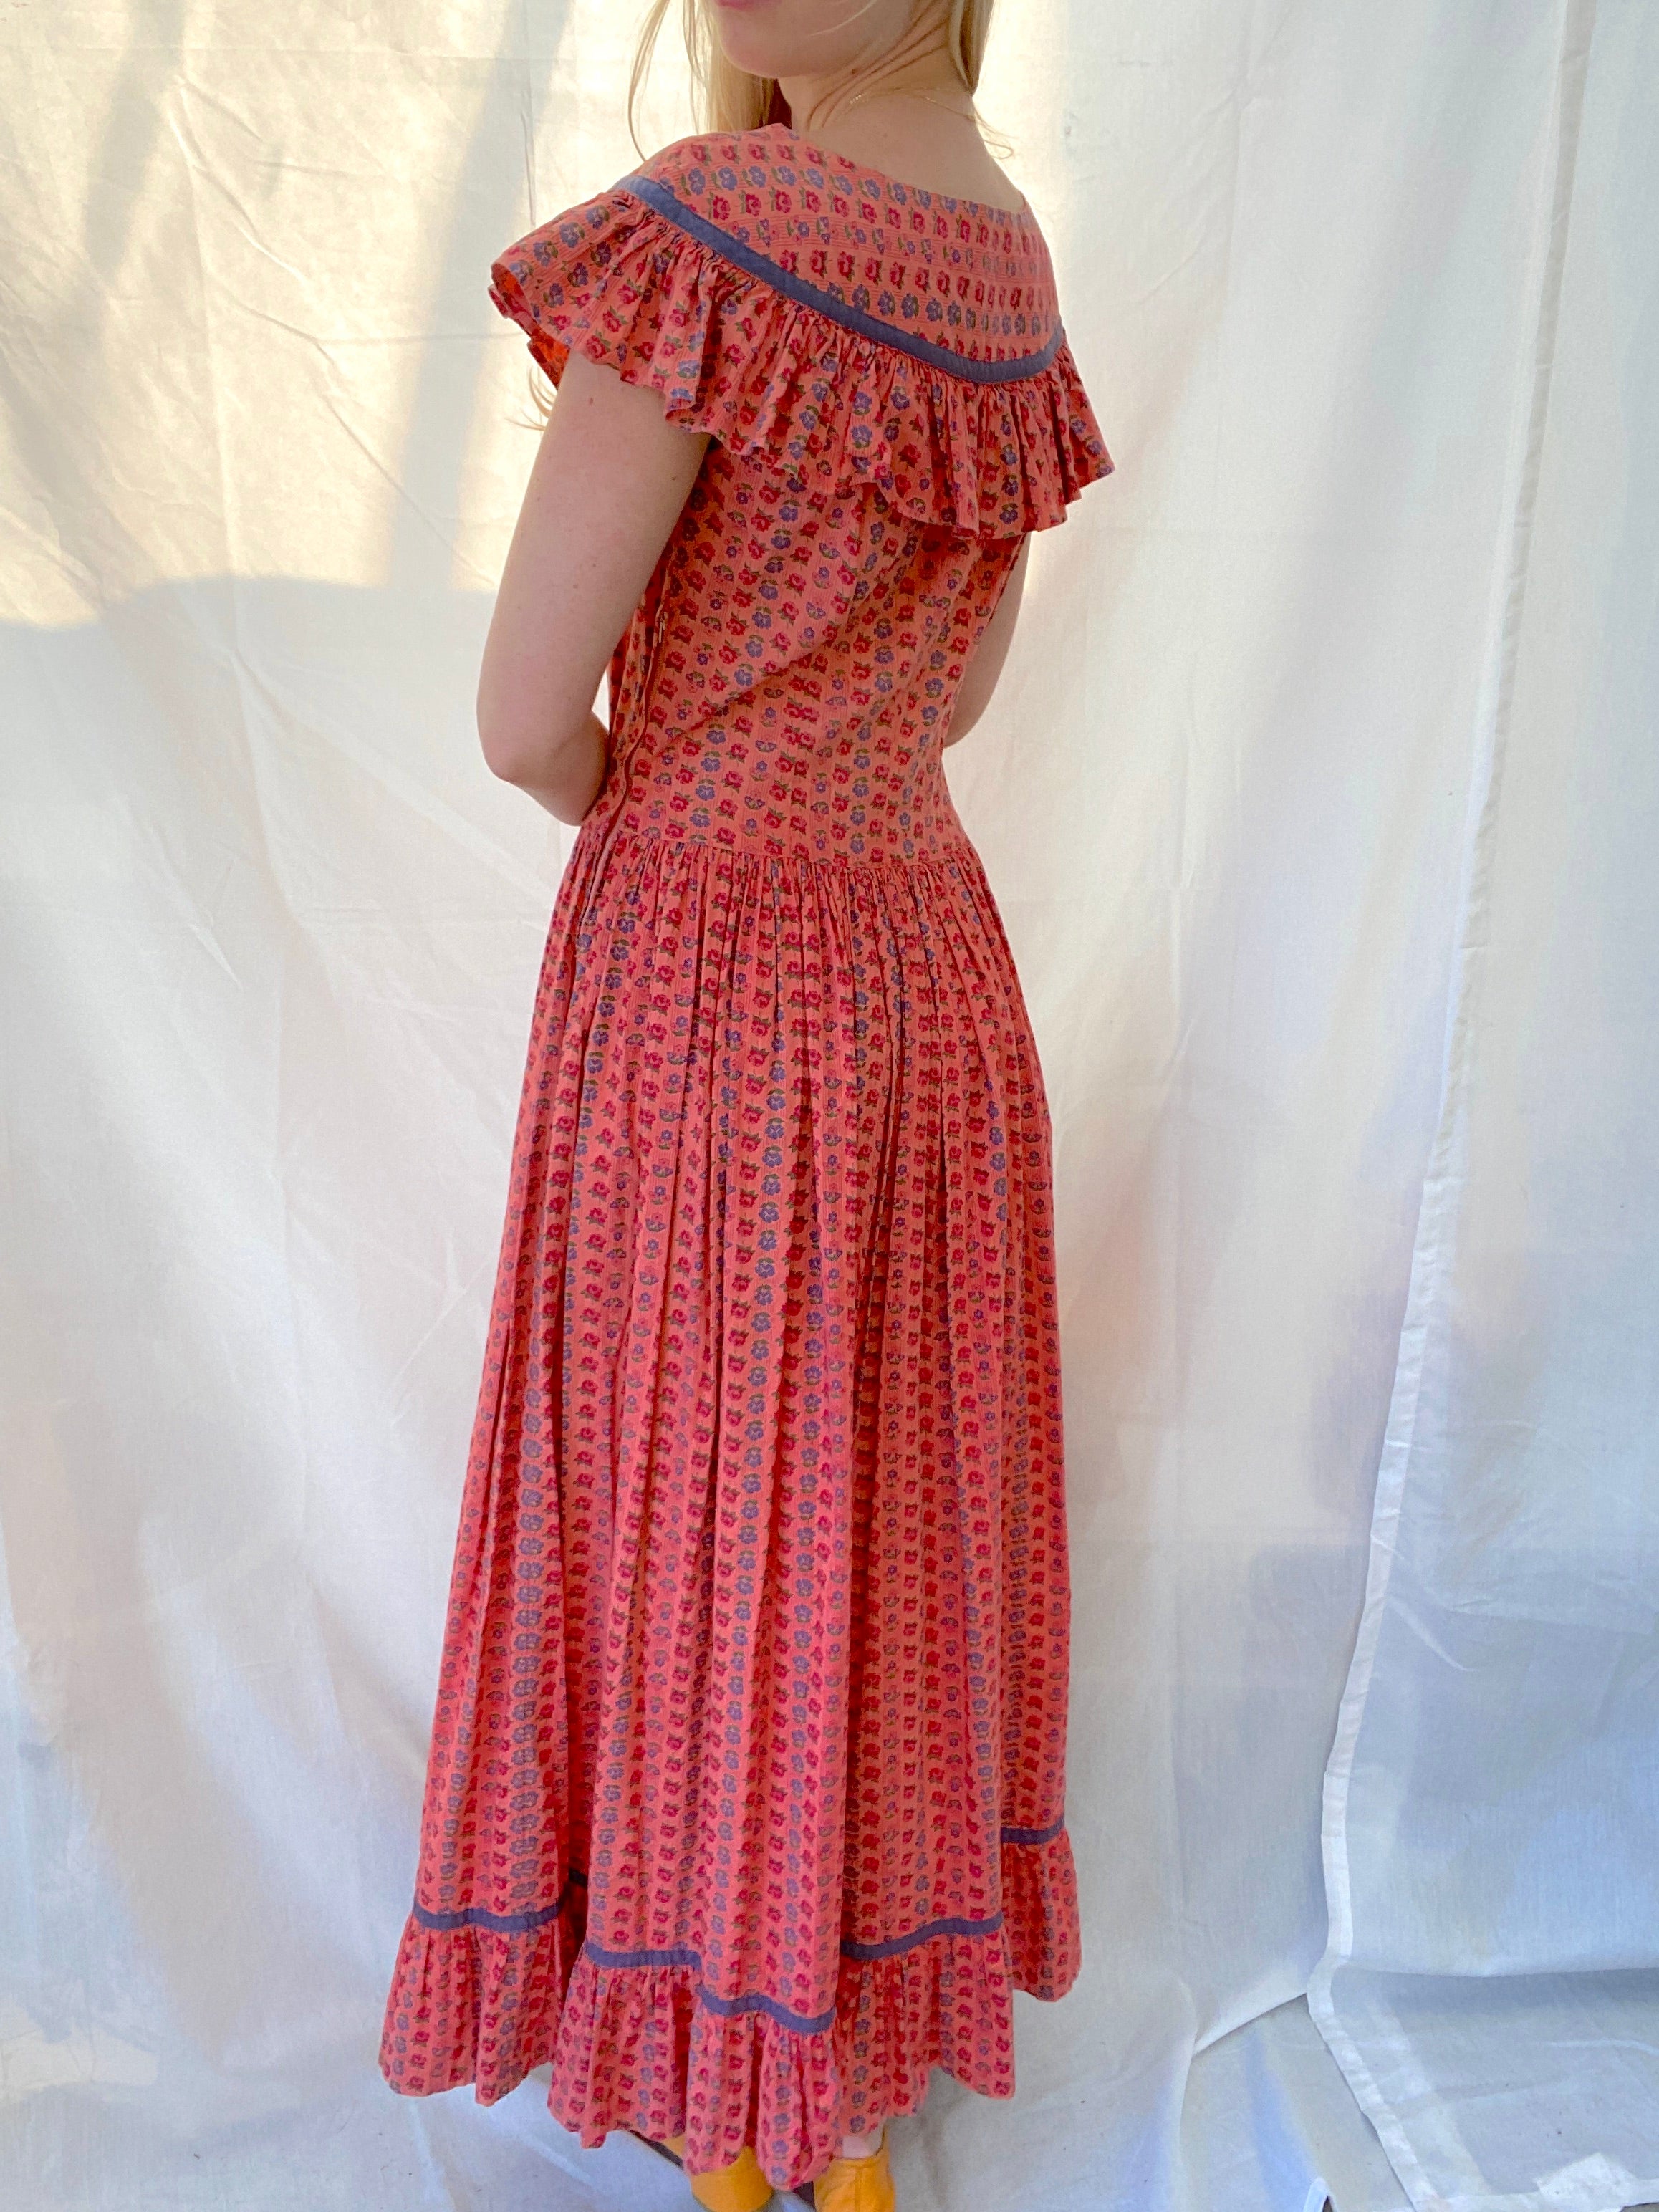 1940's Red and Blue Floral Cotton Prairie Dress